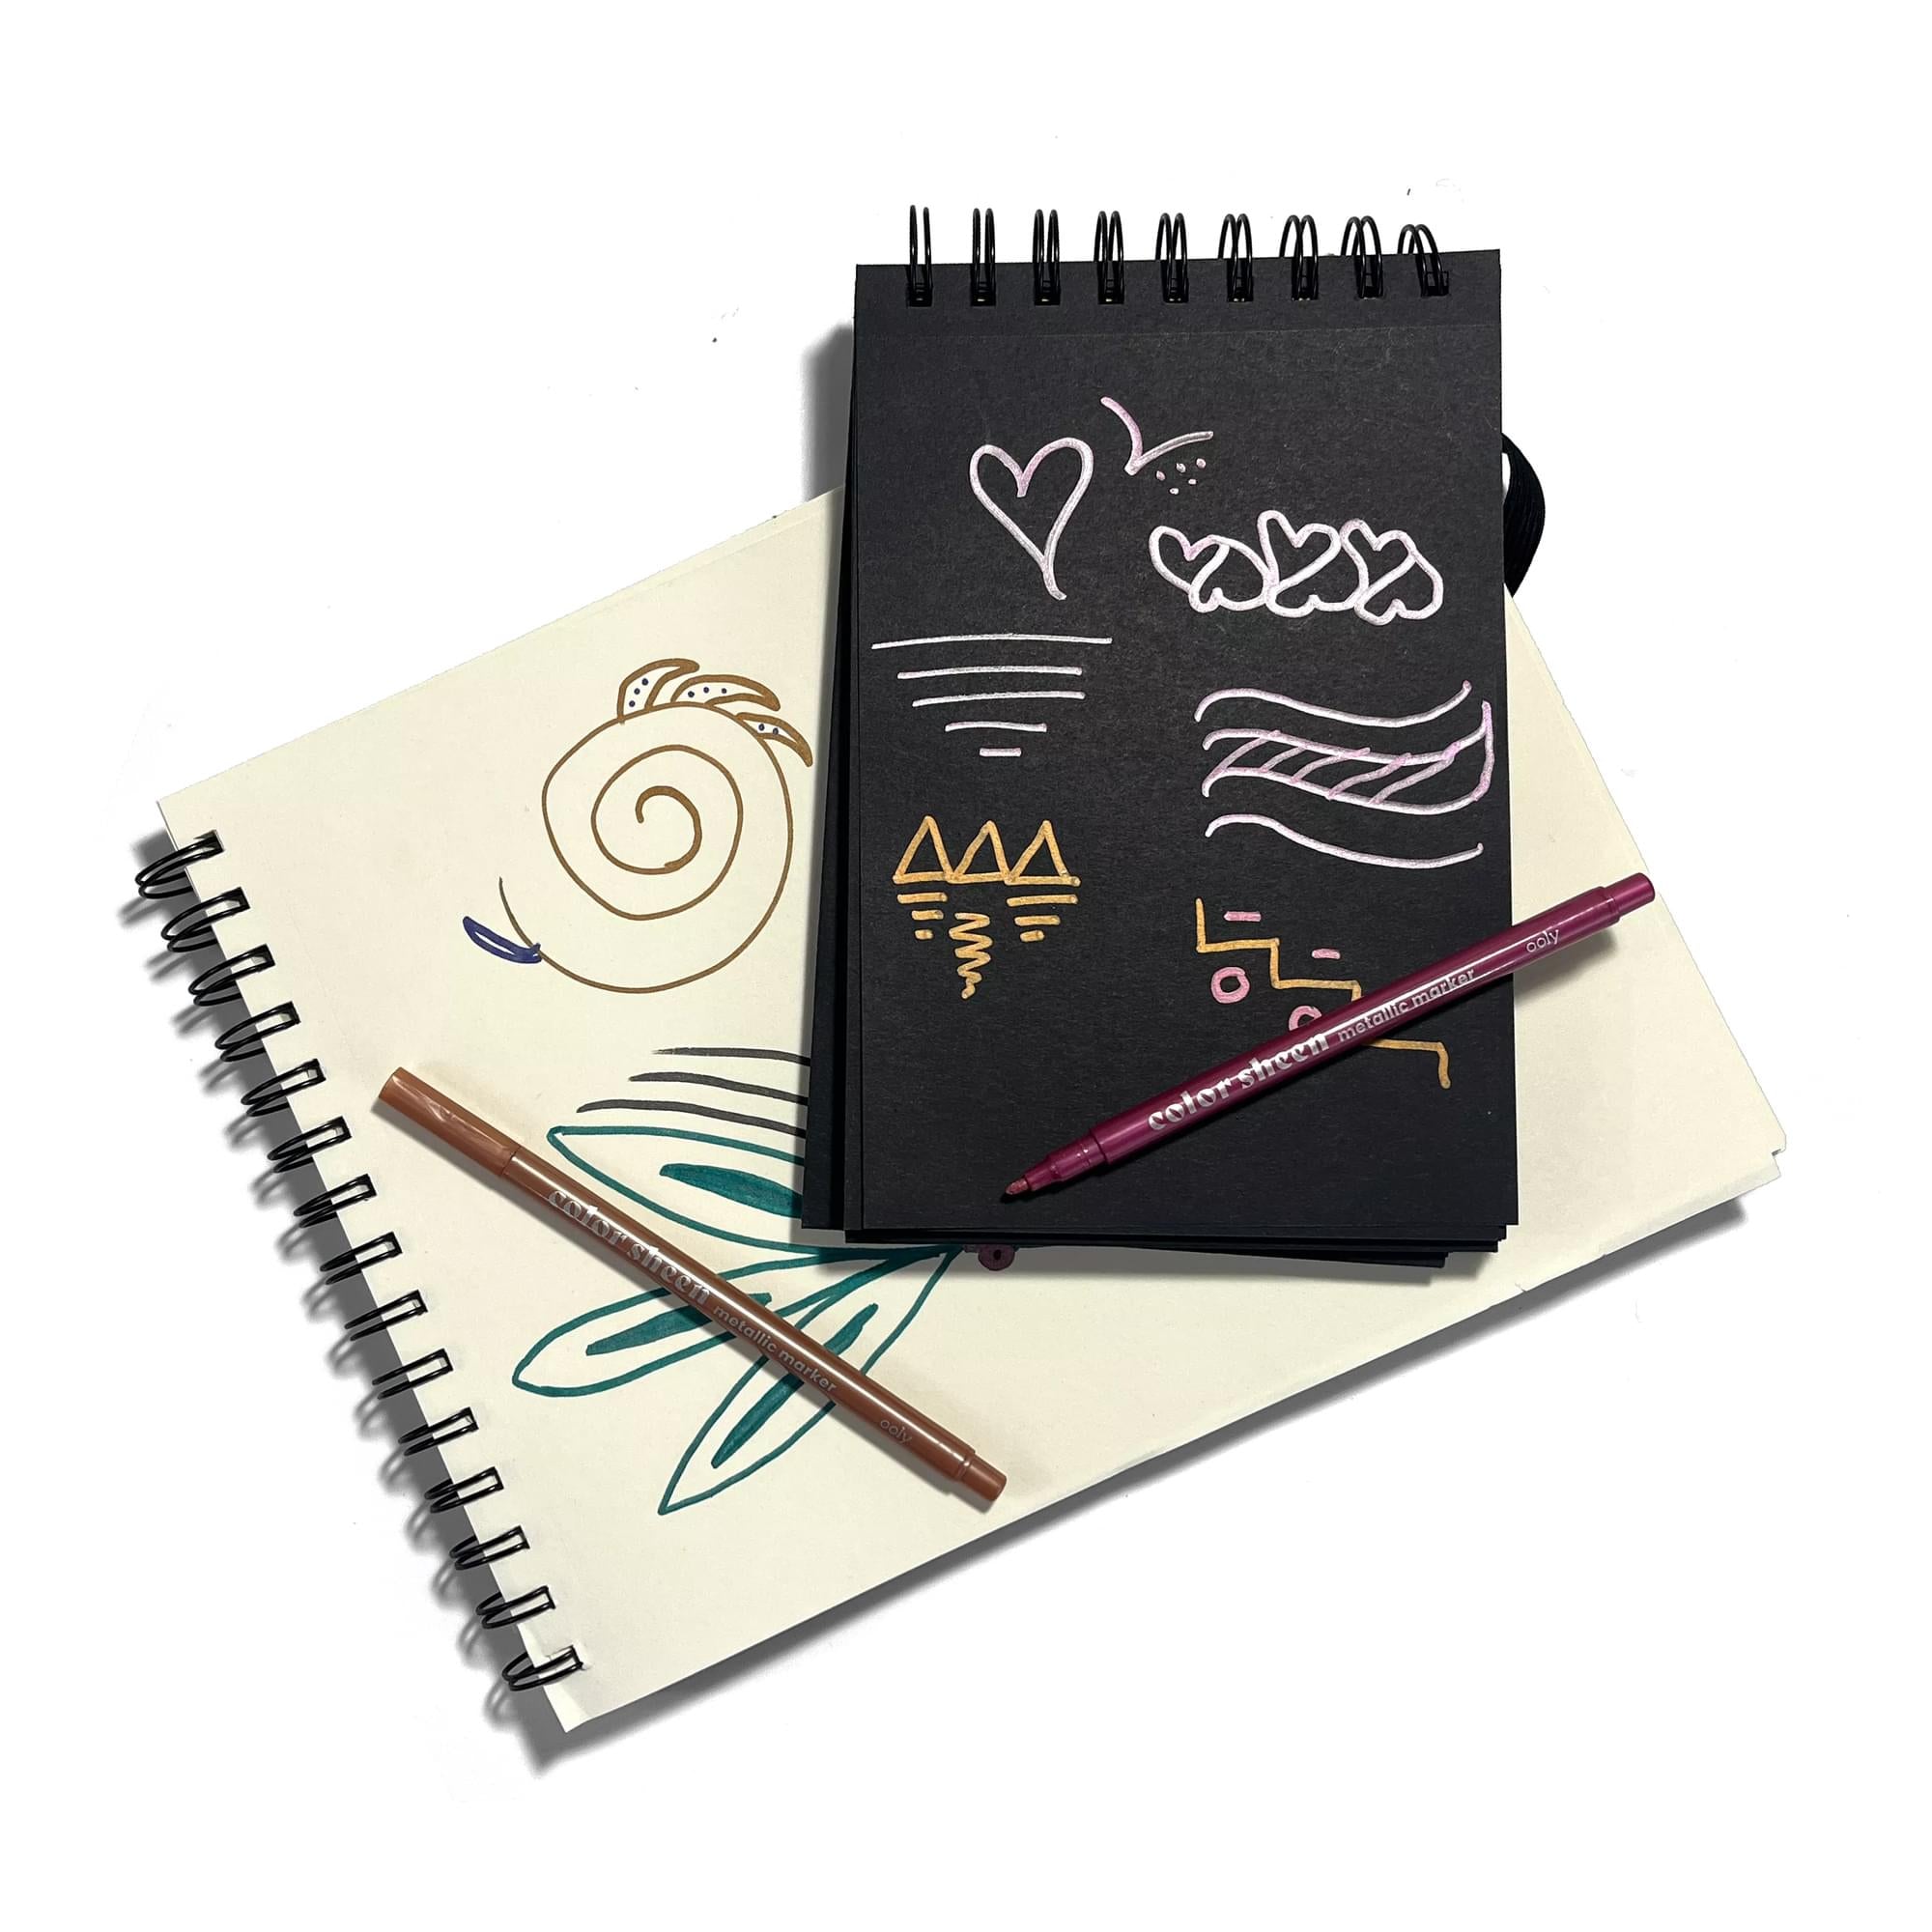 Two sketchbooks with designs from Color Sheen Metallic Colored Felt Tip Markers